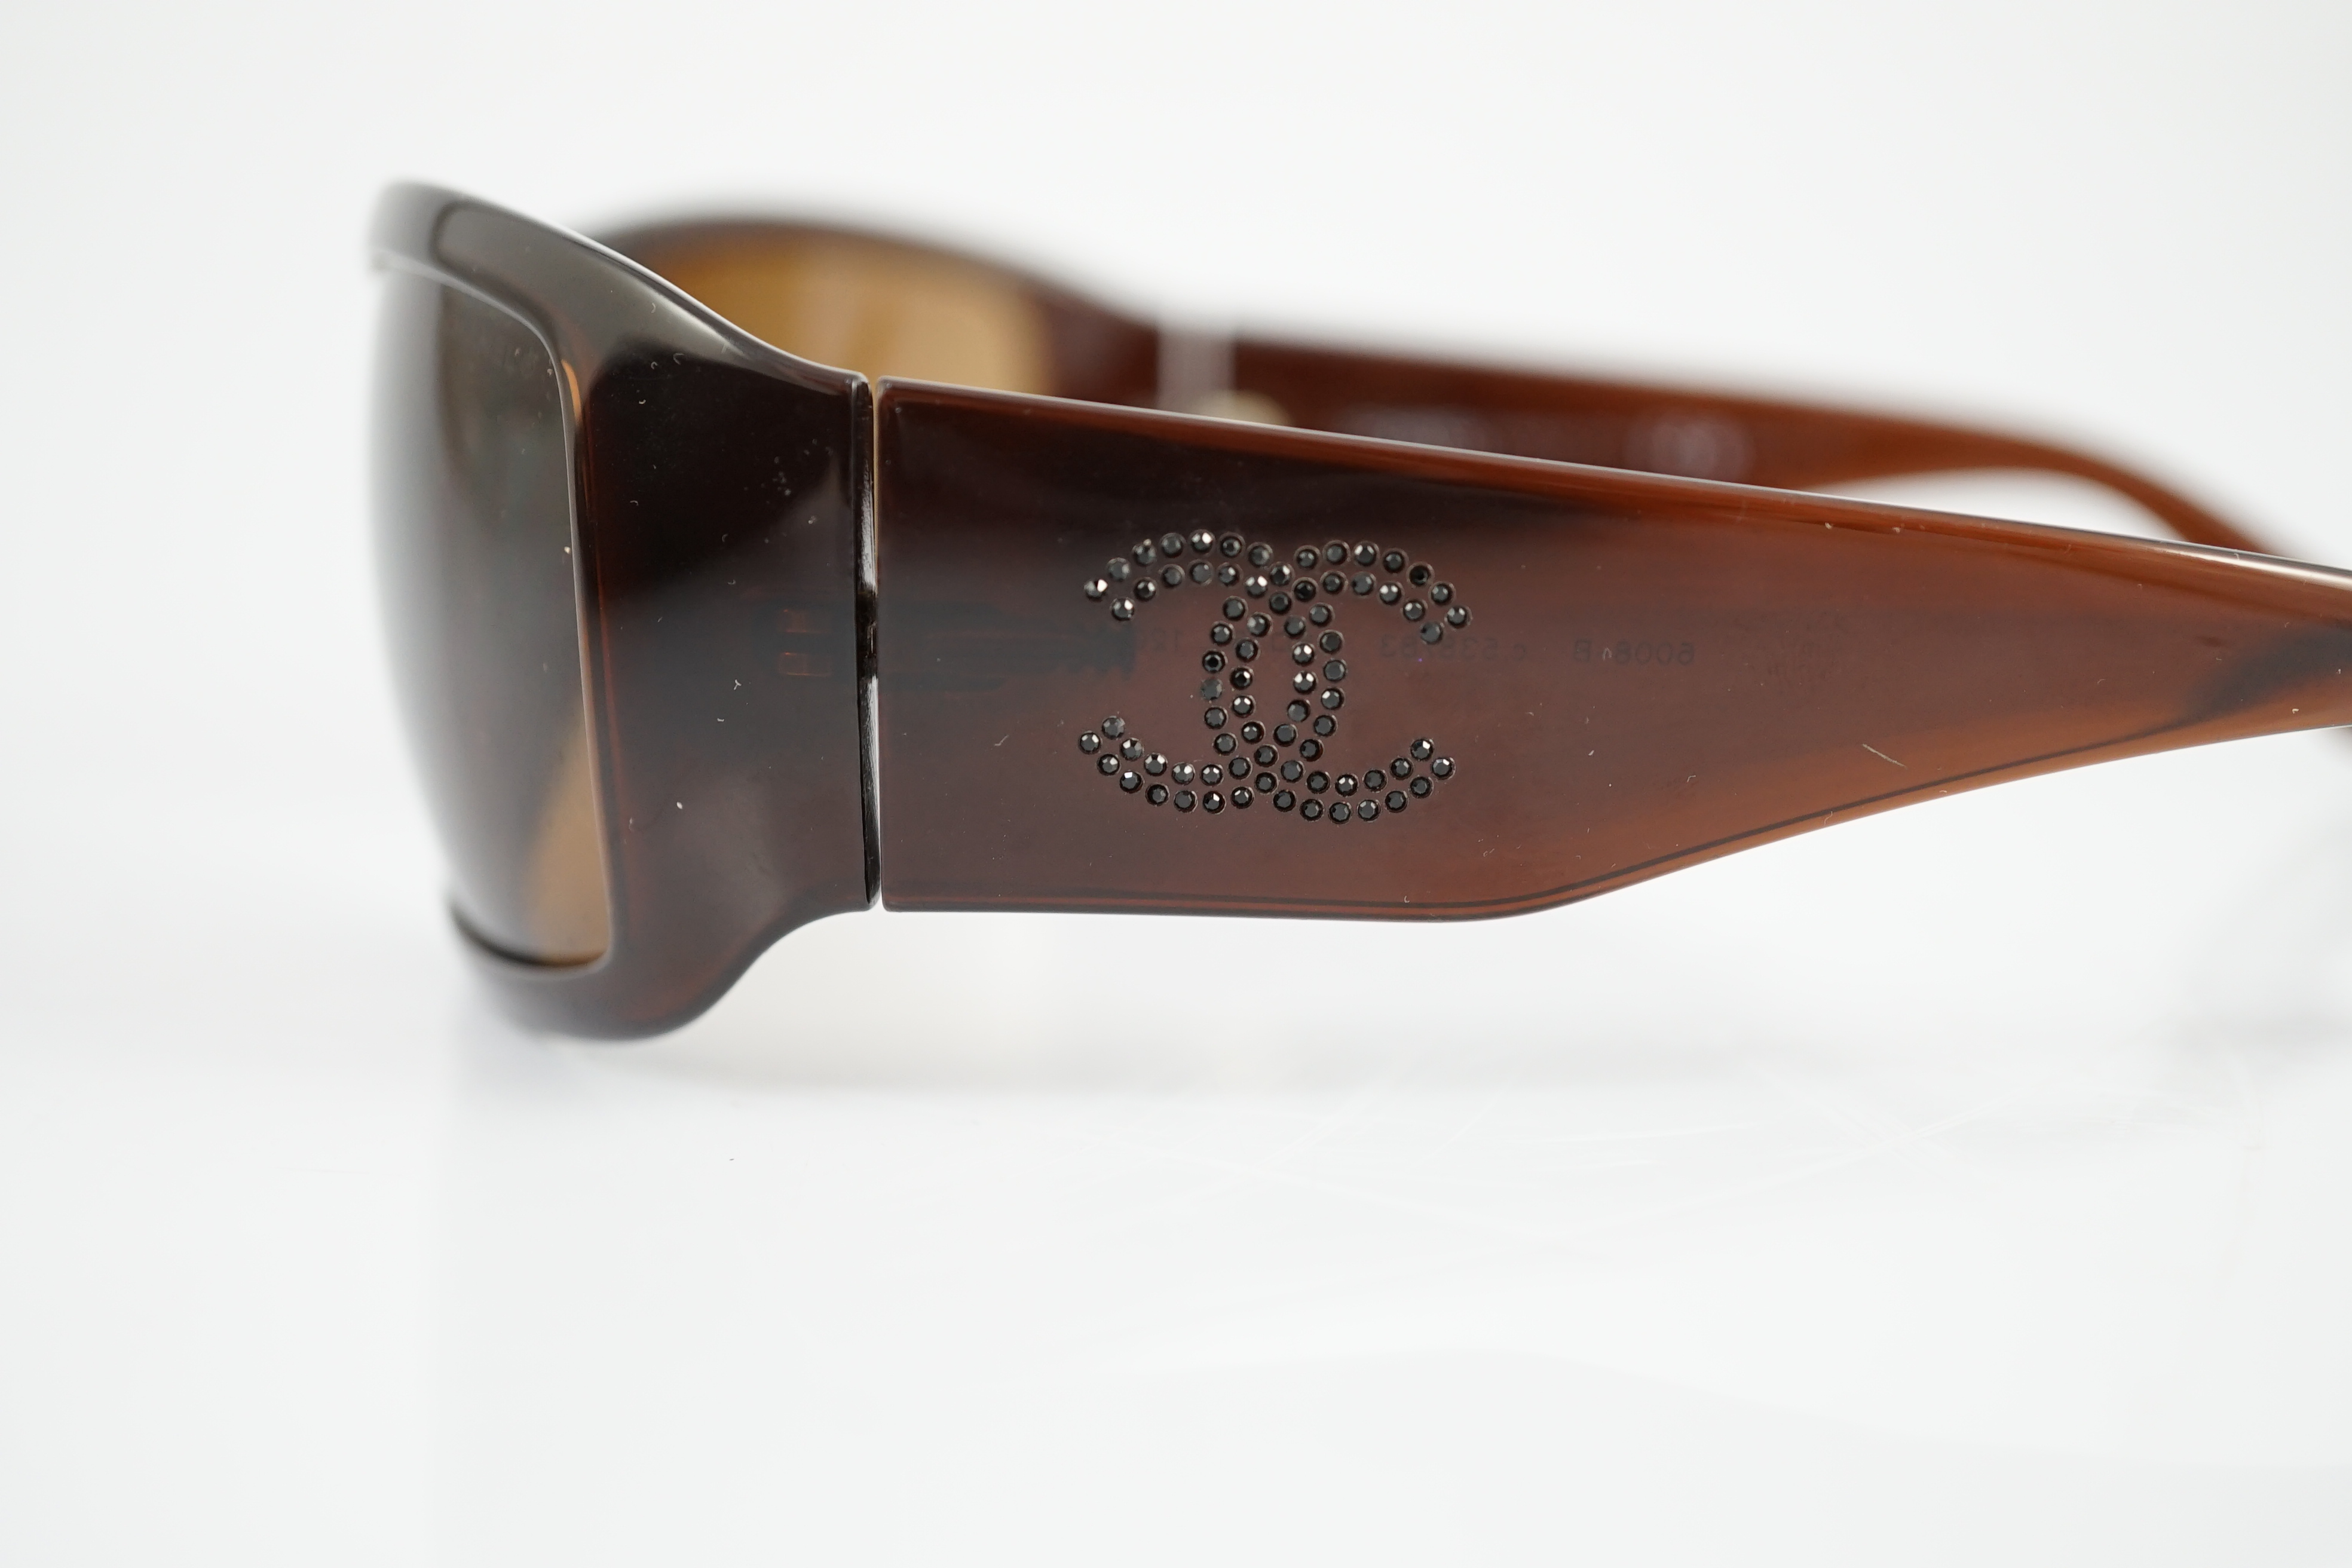 A pair of Chanel brown sunglasses